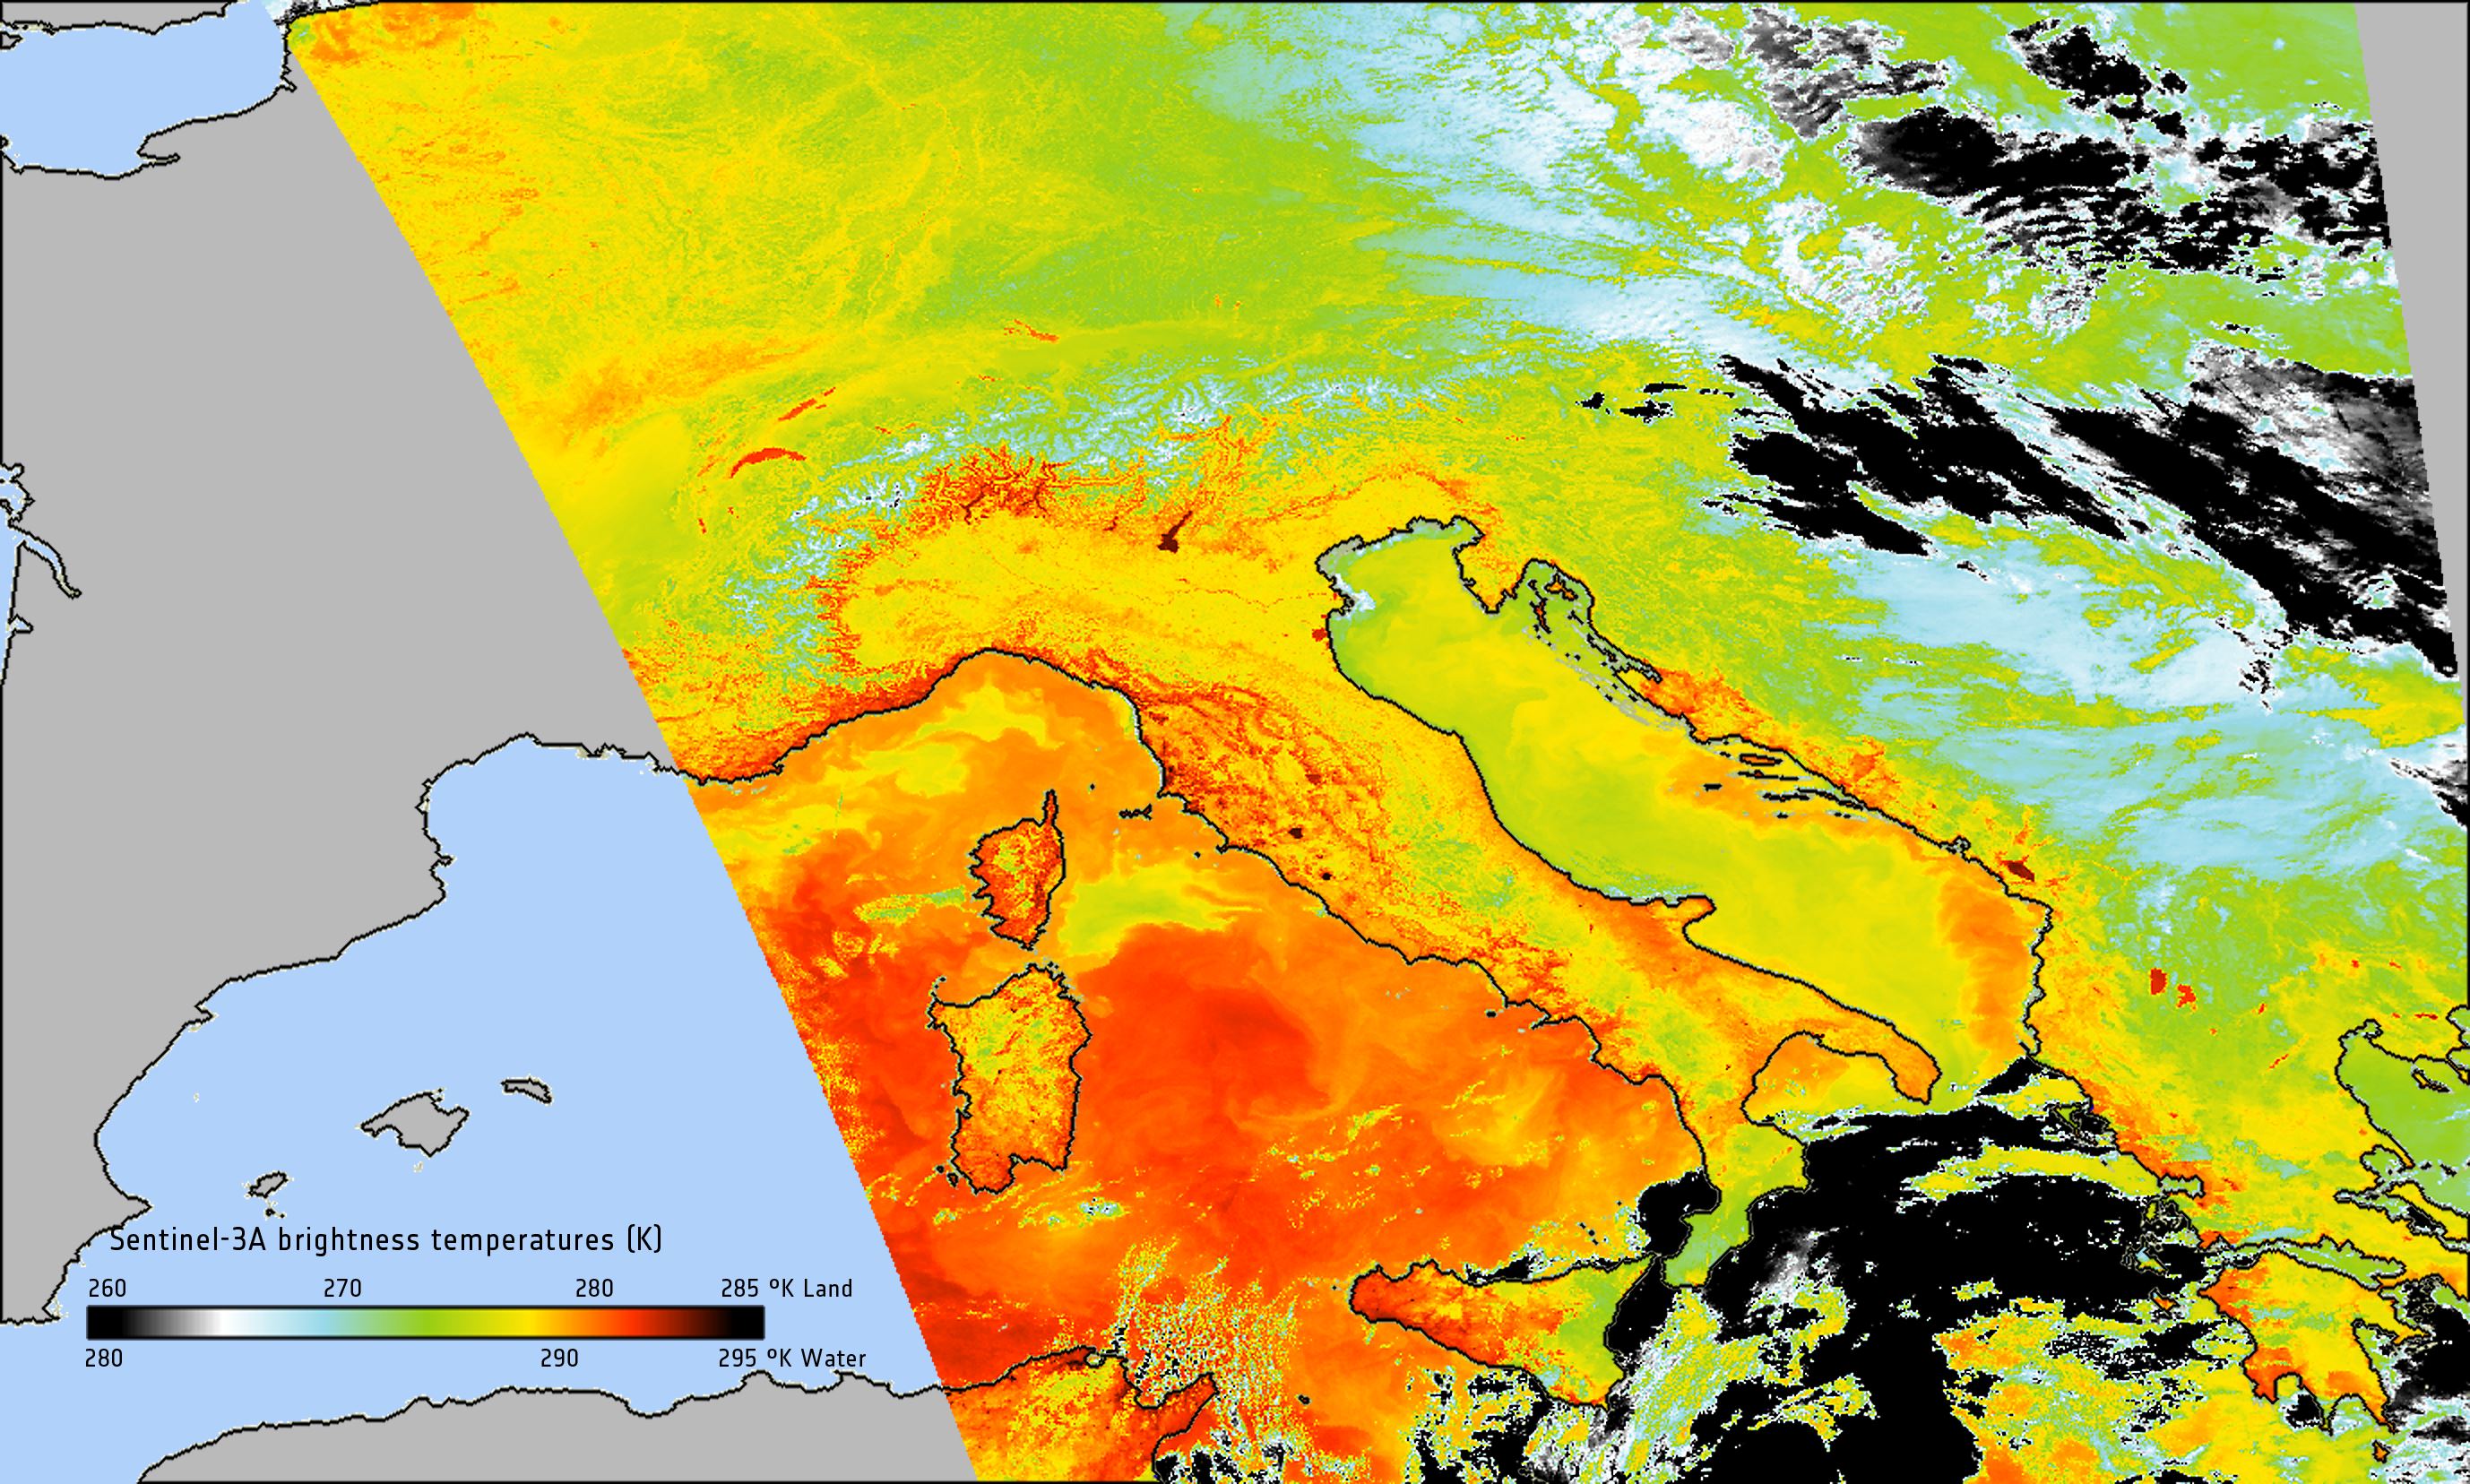 This surface temperature image has just been released by ESA